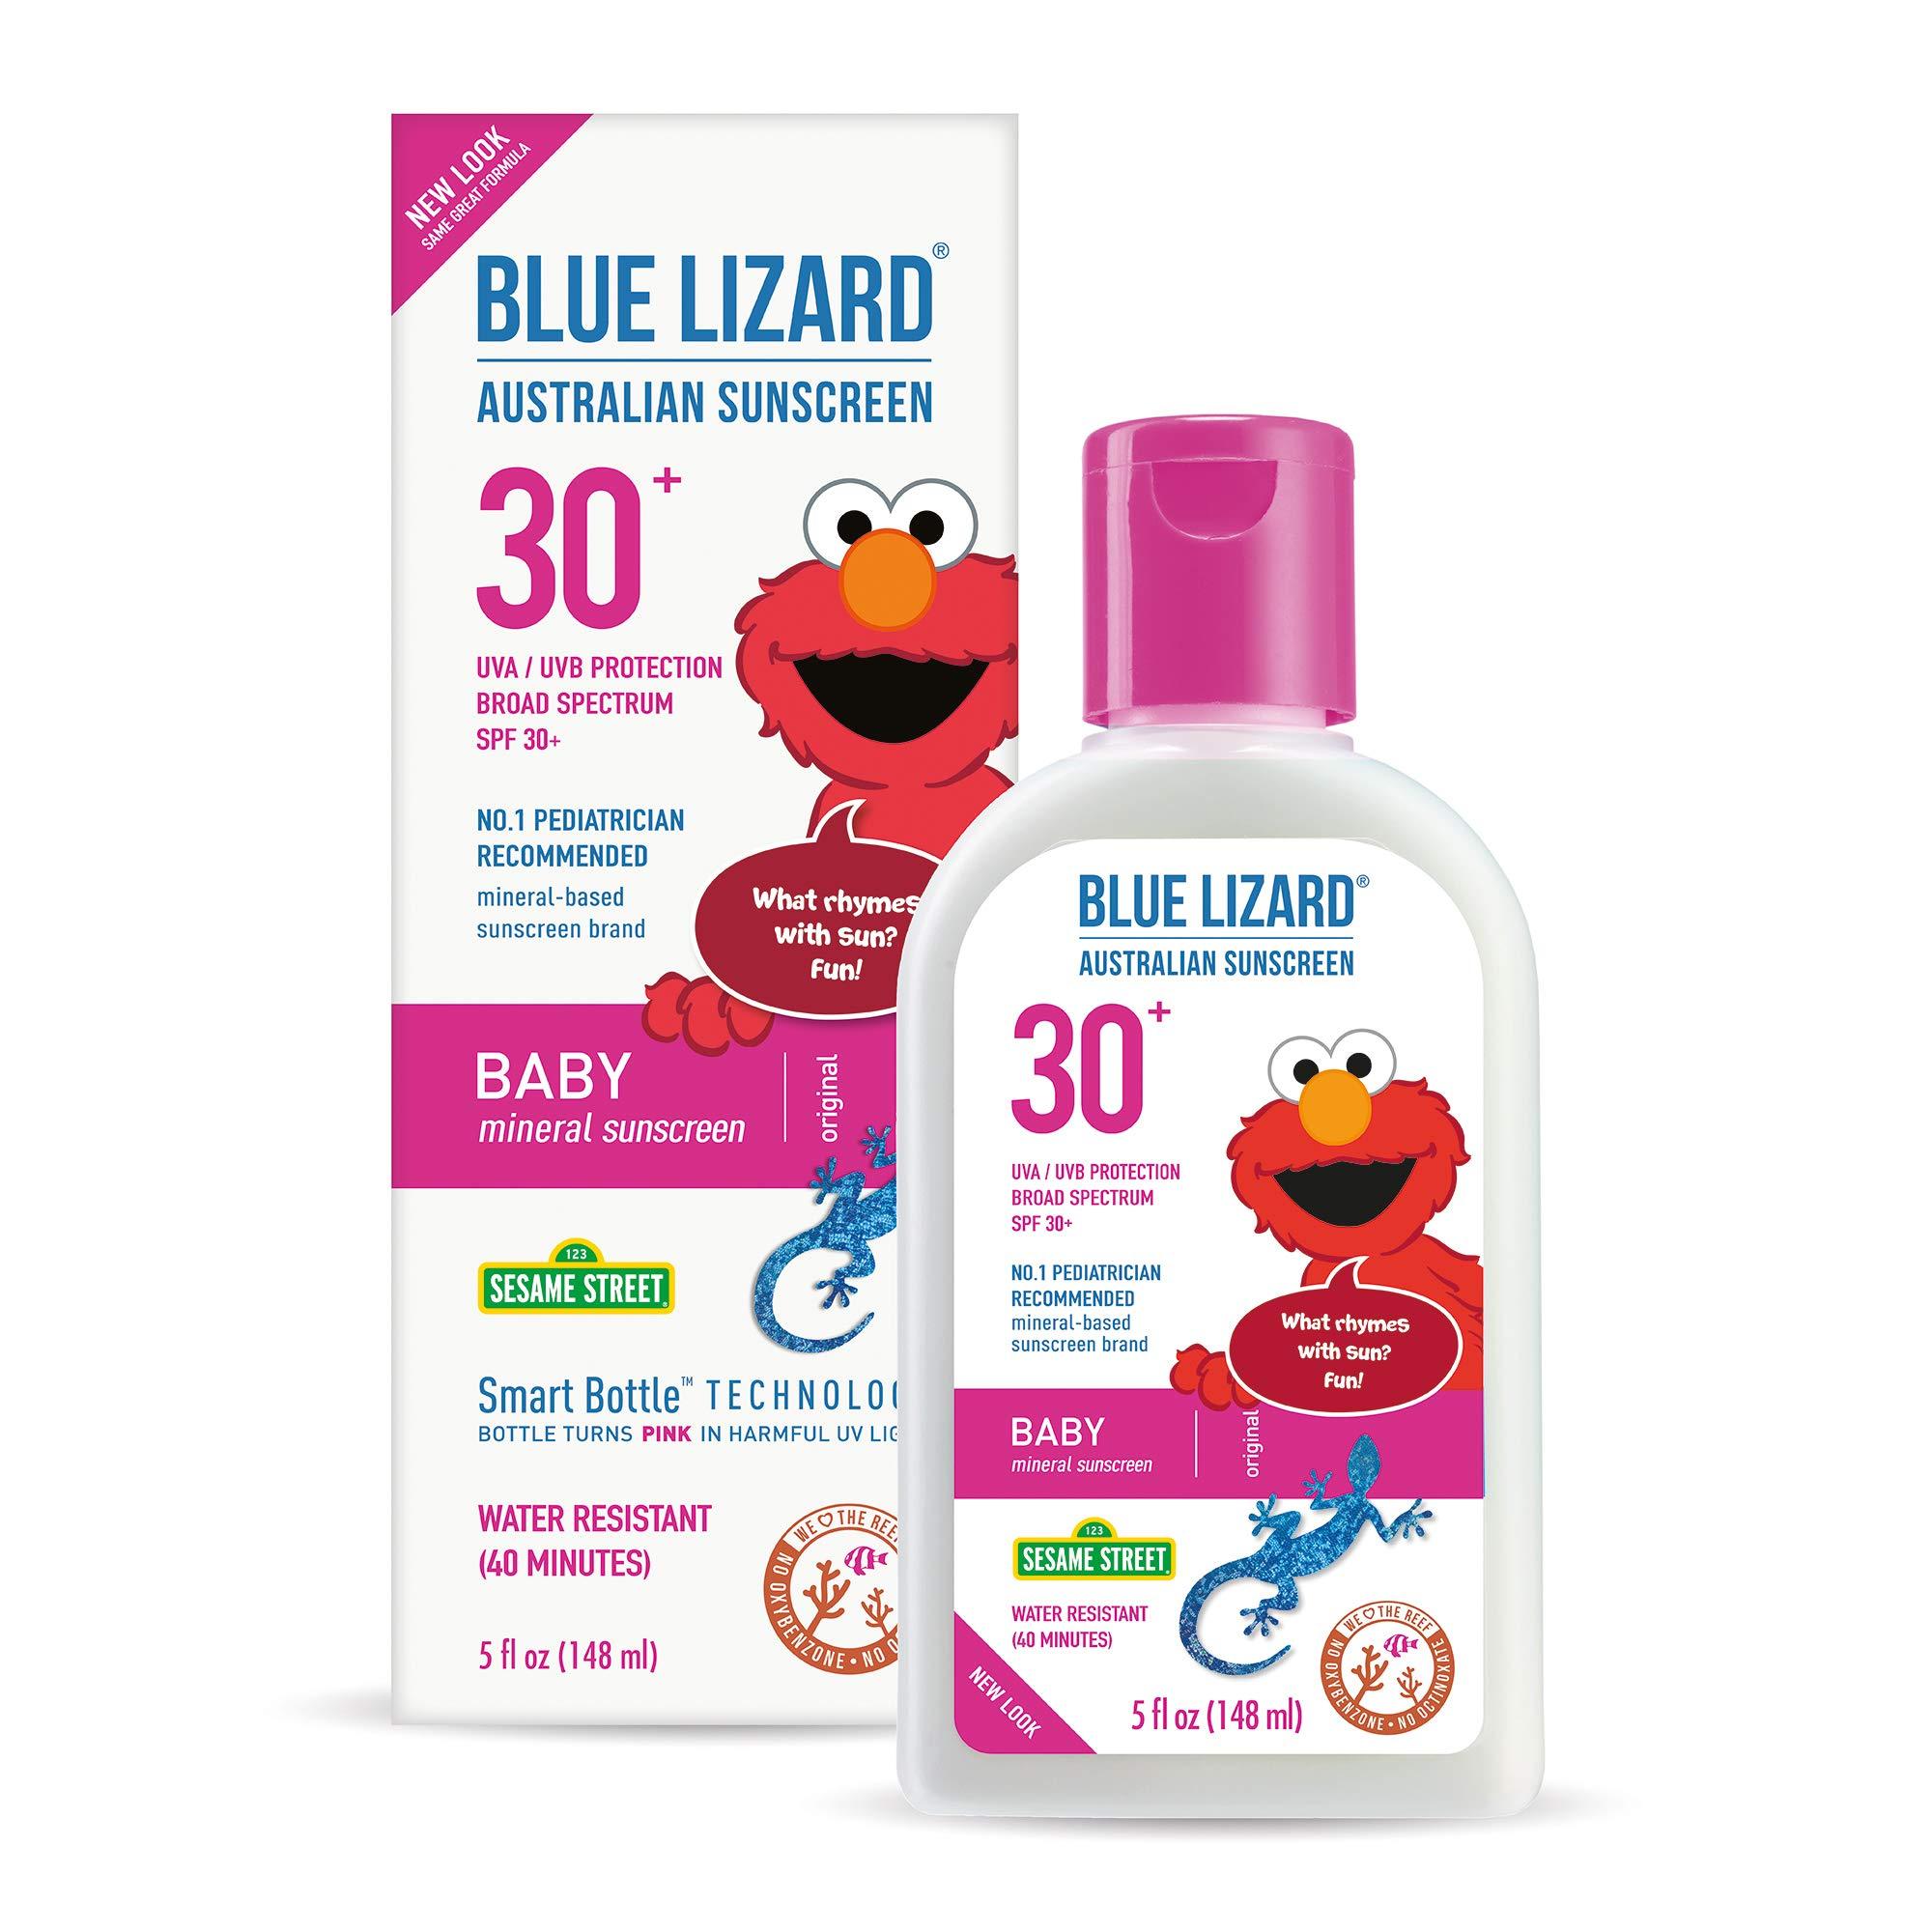 Blue Lizard Baby Mineral Sunscreen with No Chemical Ingredients SPF 30 UVA/UVB Protection, 5 oz Bottle 5 Fl. Oz - image 1 of 3